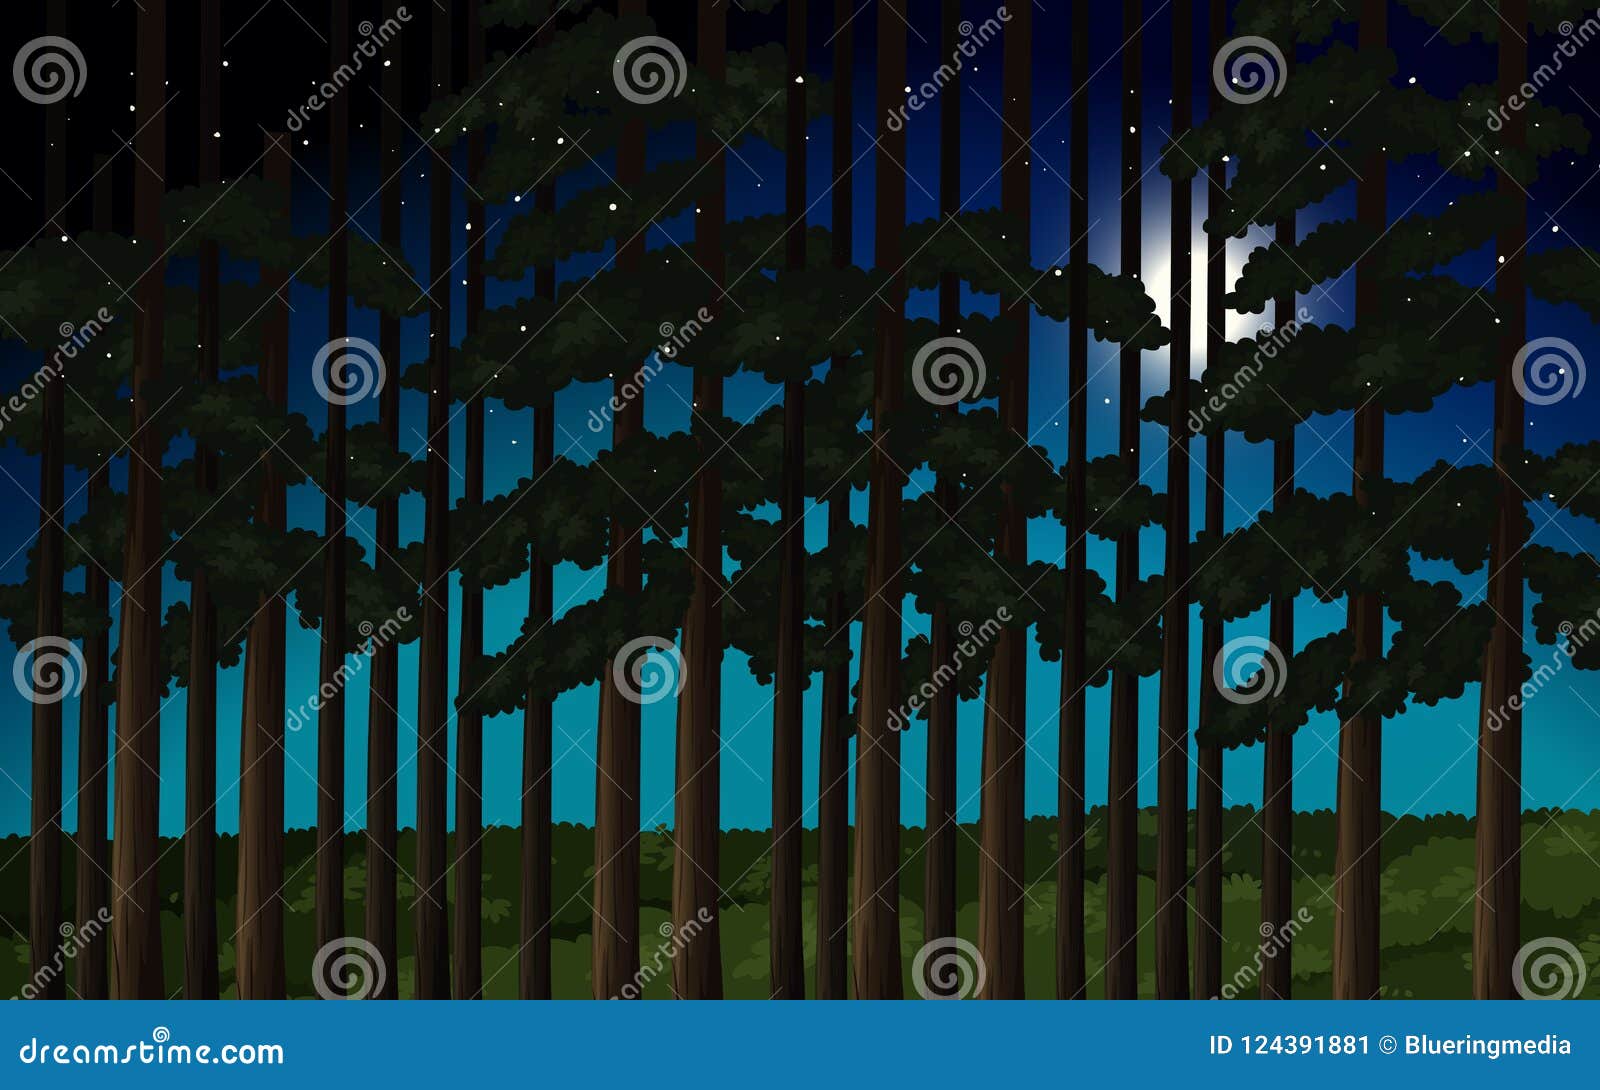 Forest at night scene stock vector. Illustration of plants - 124391881